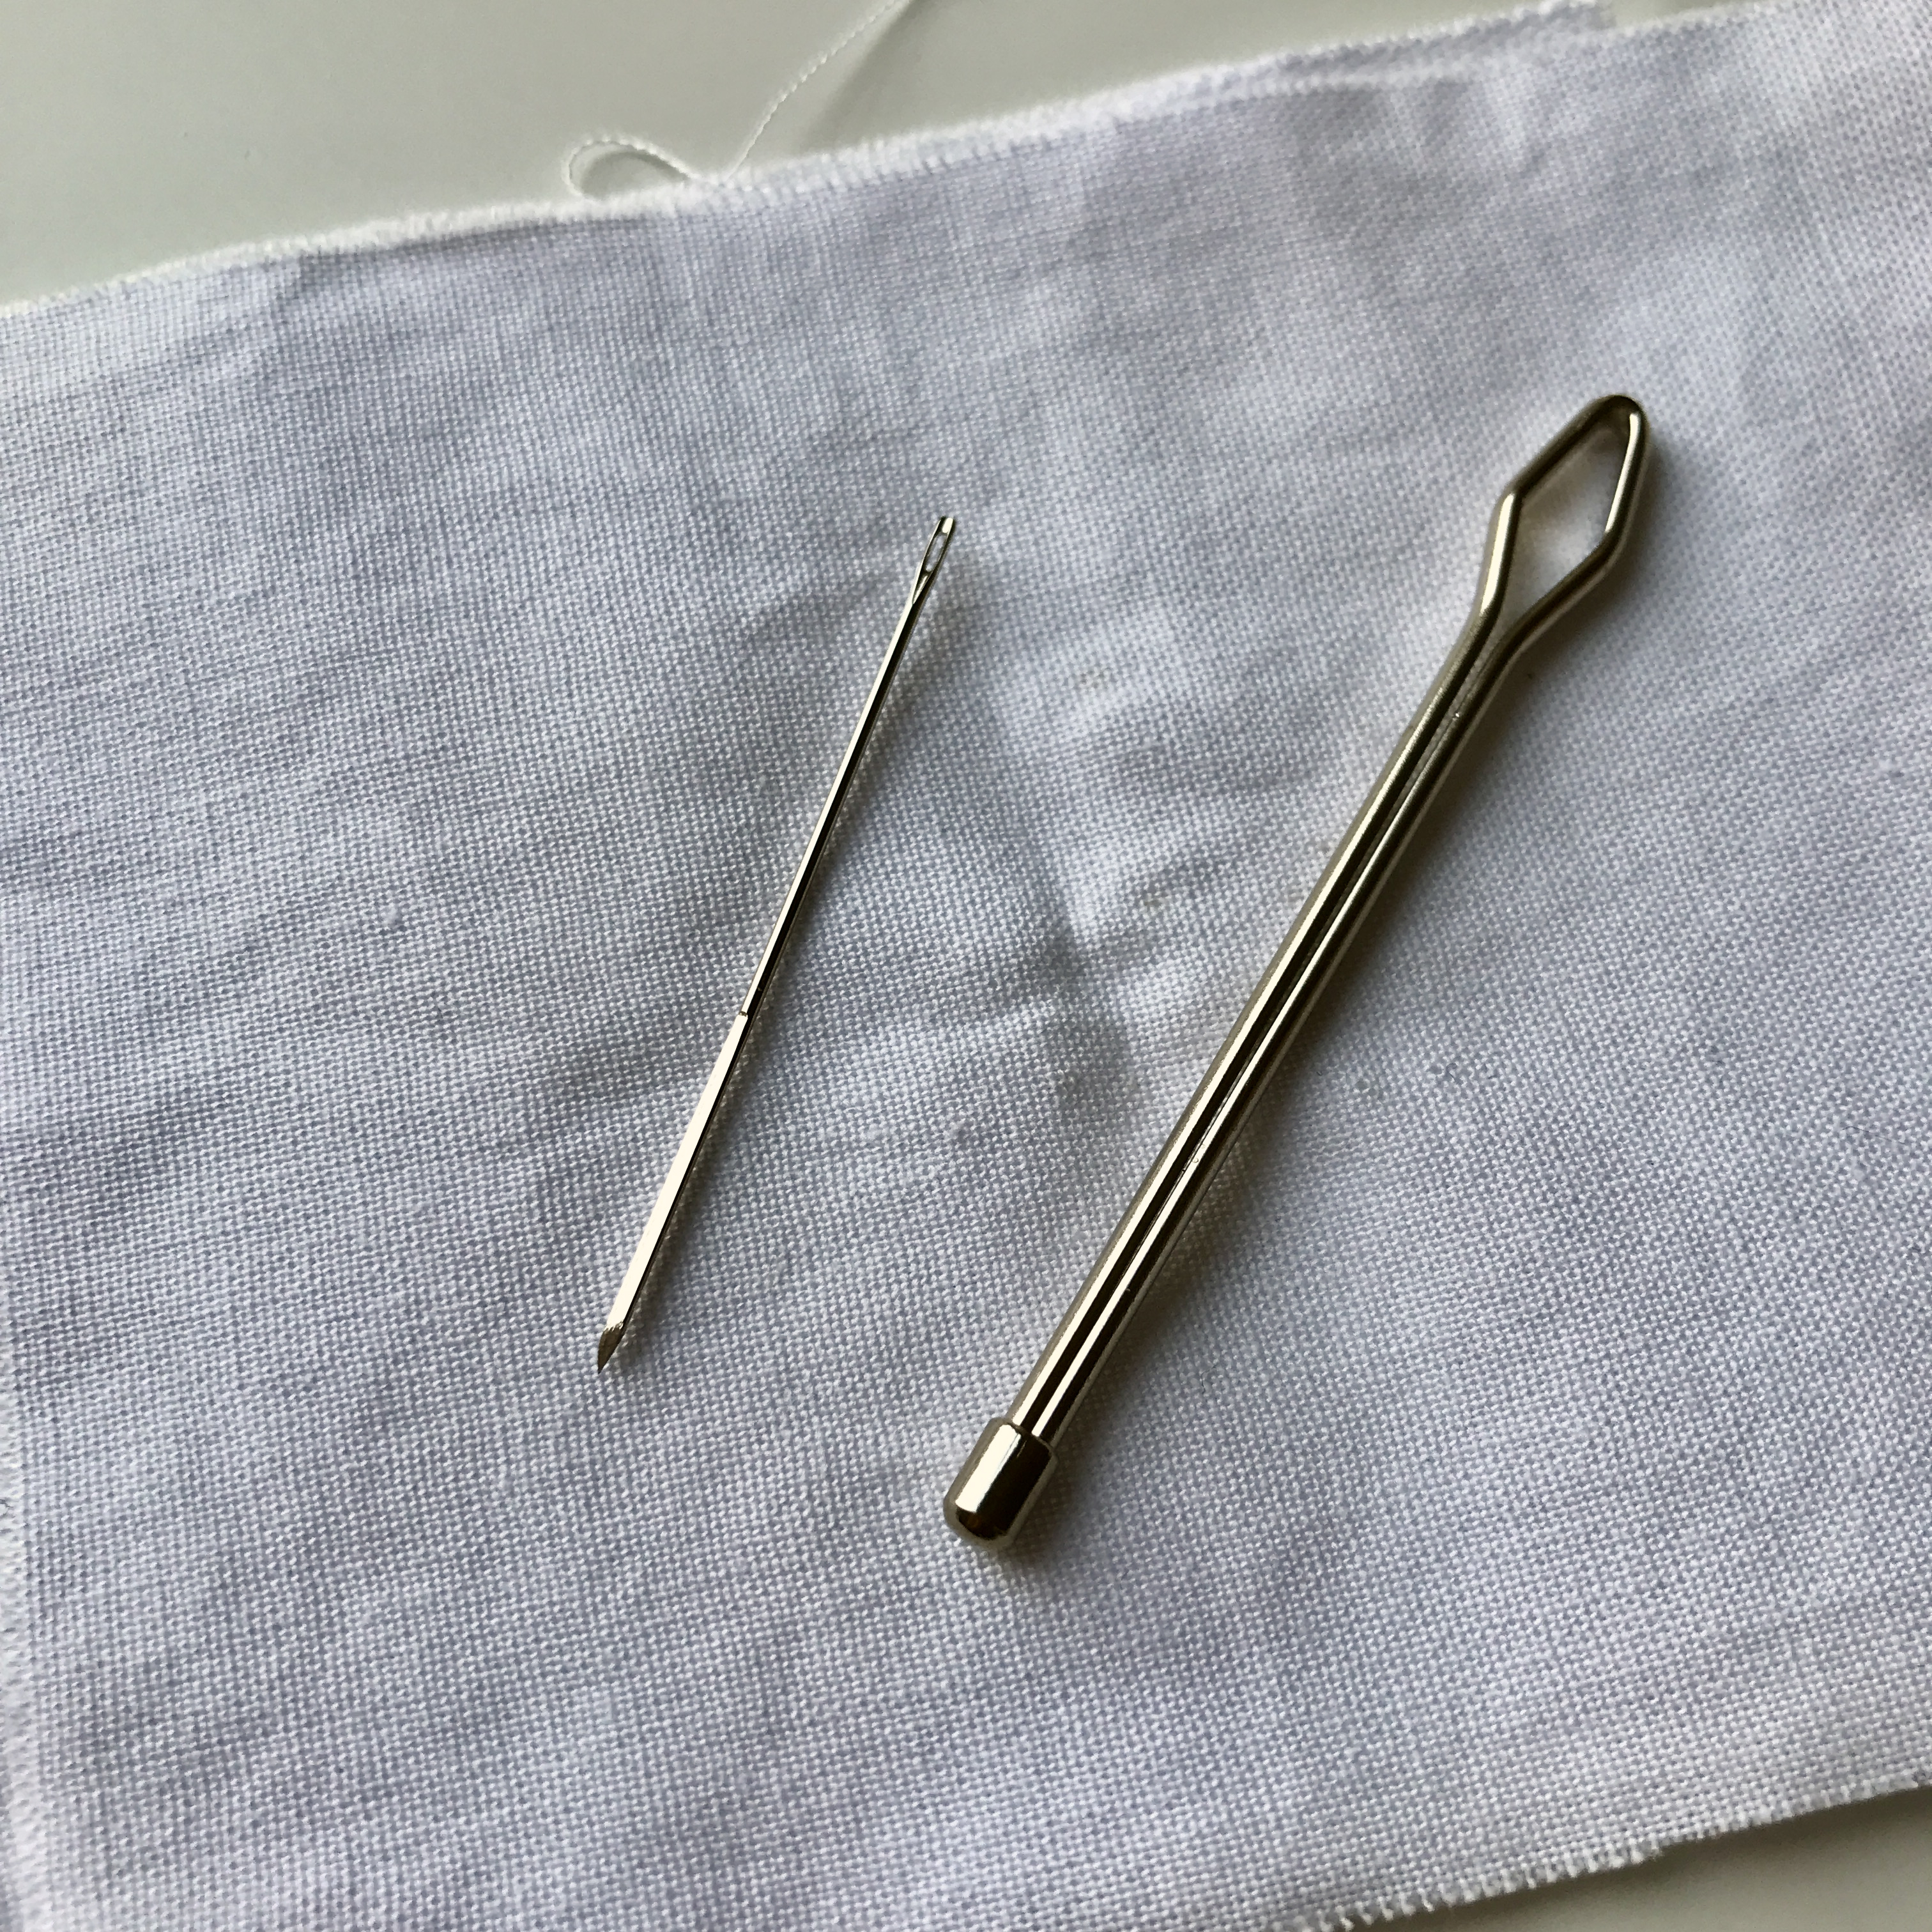 Taking Care of Embroidery Needles –